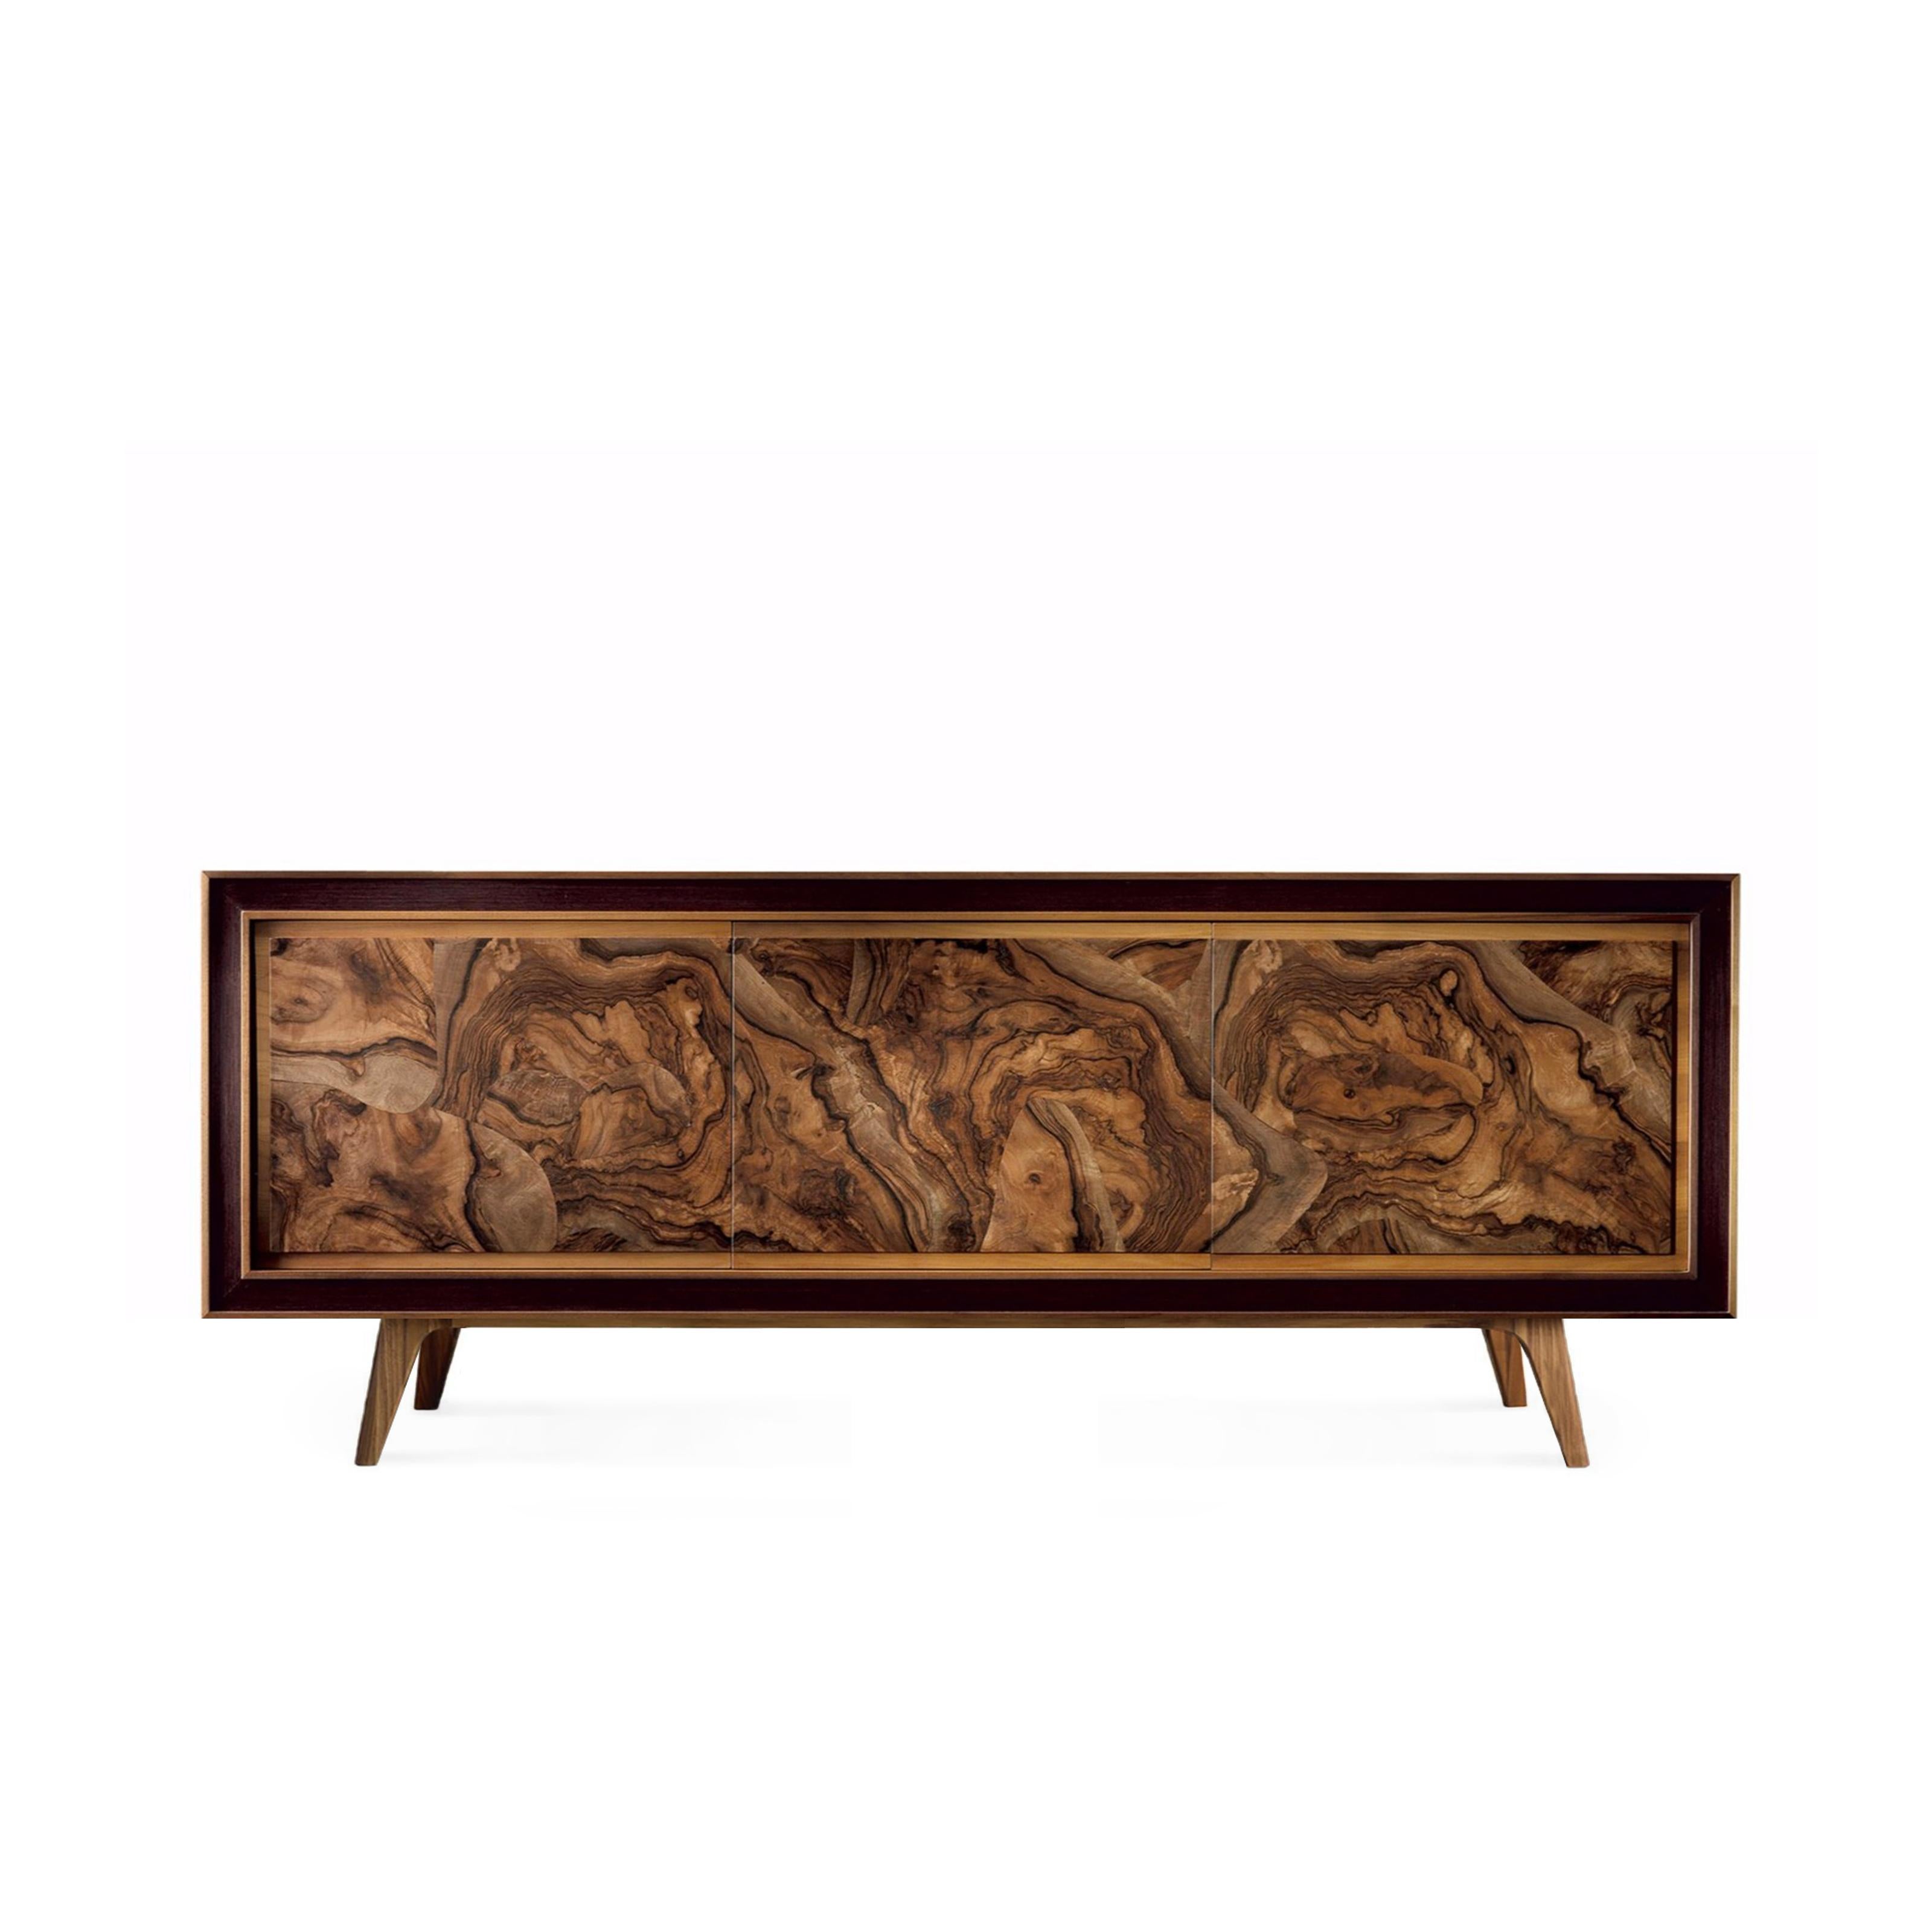 Quadra Solid Wood Sideboard, Walnut, Briar in Natural Finish, Contemporary For Sale 2